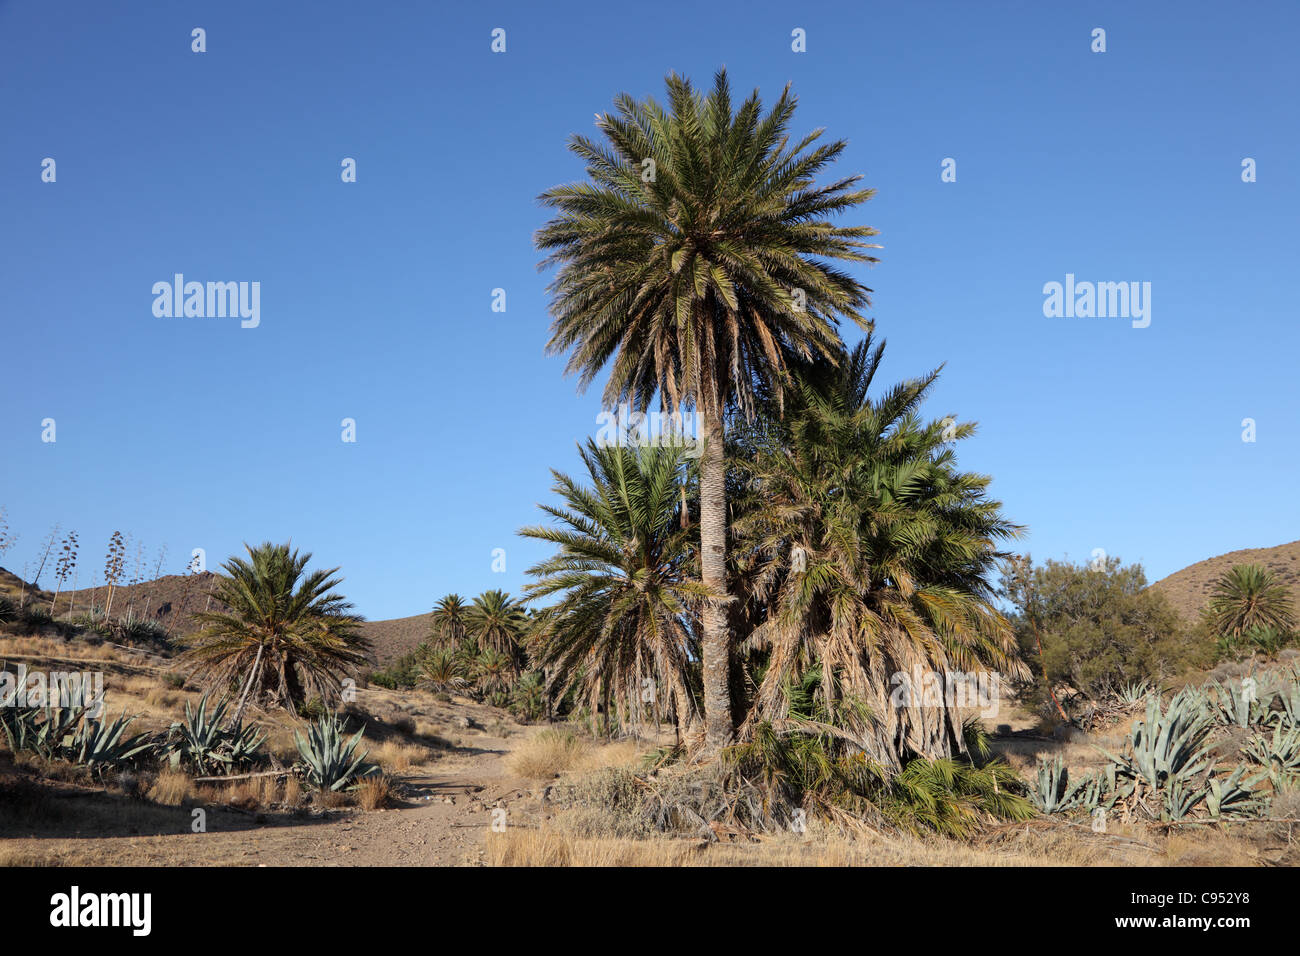 Date palm trees in Andalusia, Spain Stock Photo